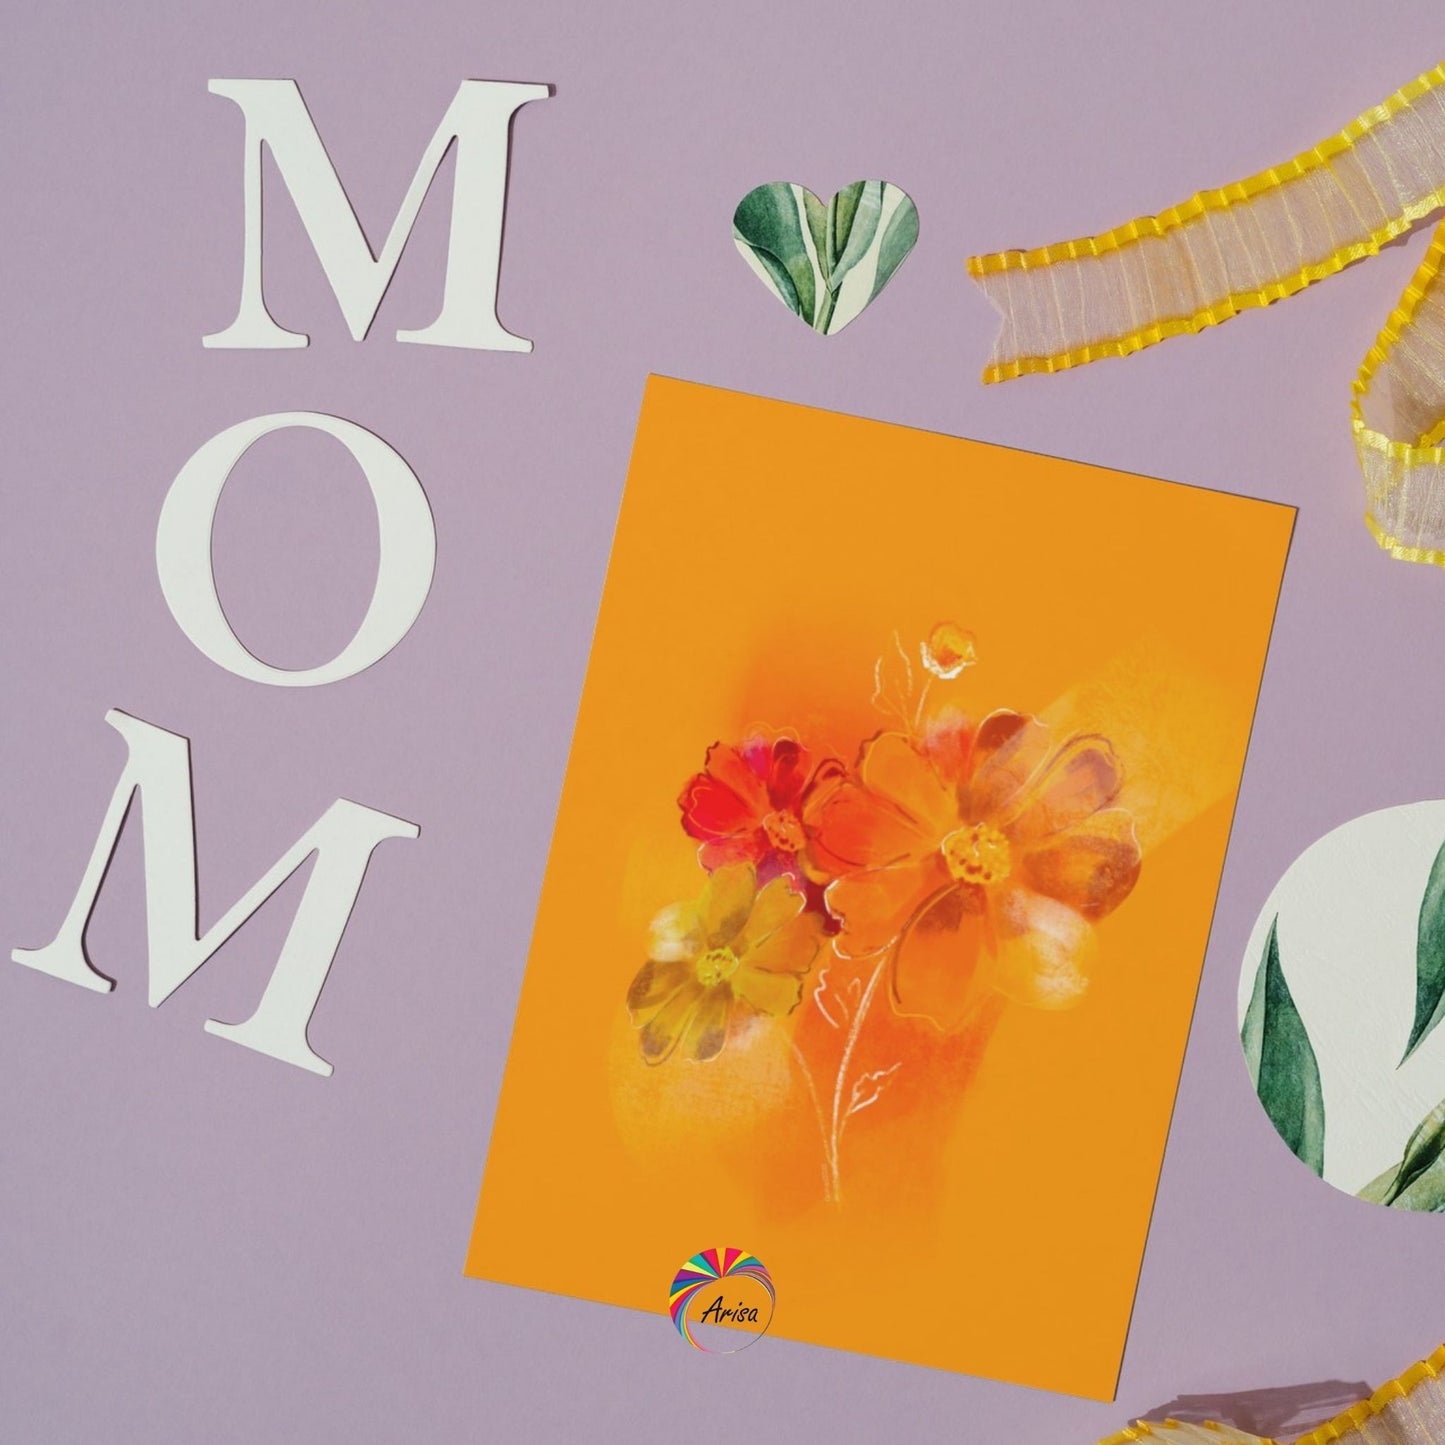 "Cosmos" Greeting Card by ArisaTeam with the word mom close to the card ideal as a Mother's Day card.